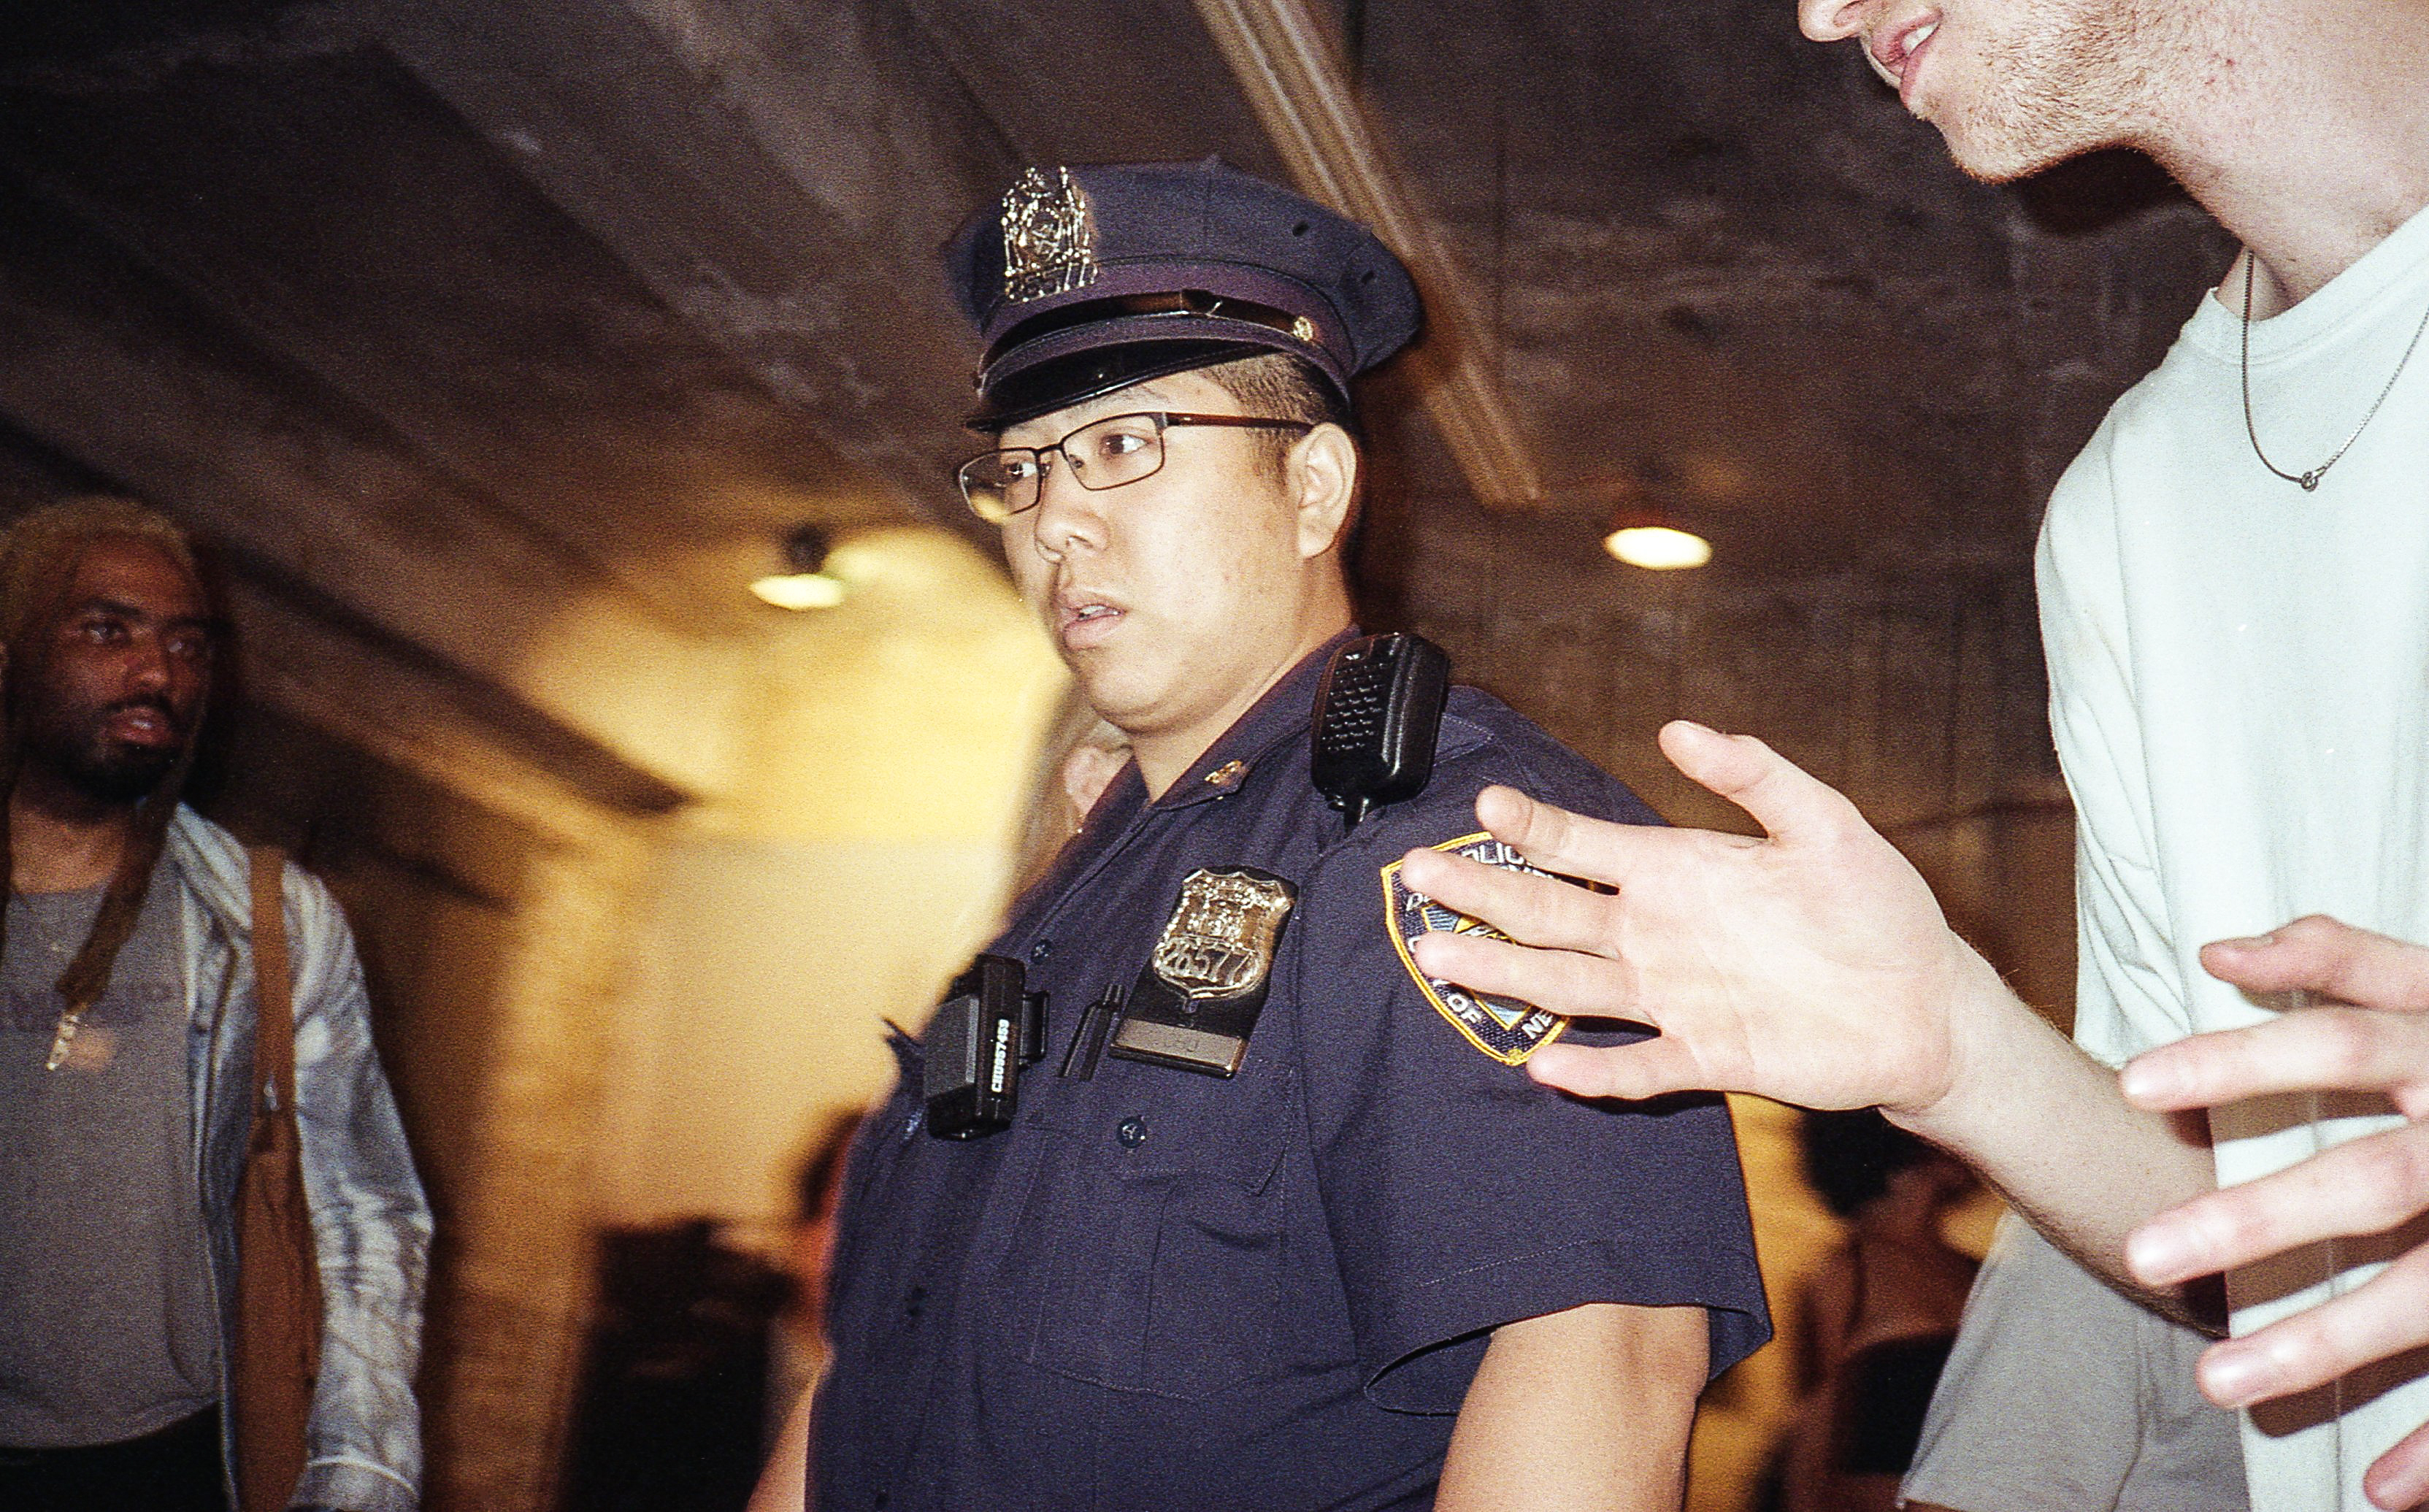 Even the NYPD came down to check out the Drawing a Blank show in Harlem, NYC, 2018 - © Photography by Chase Hall, System Magazine